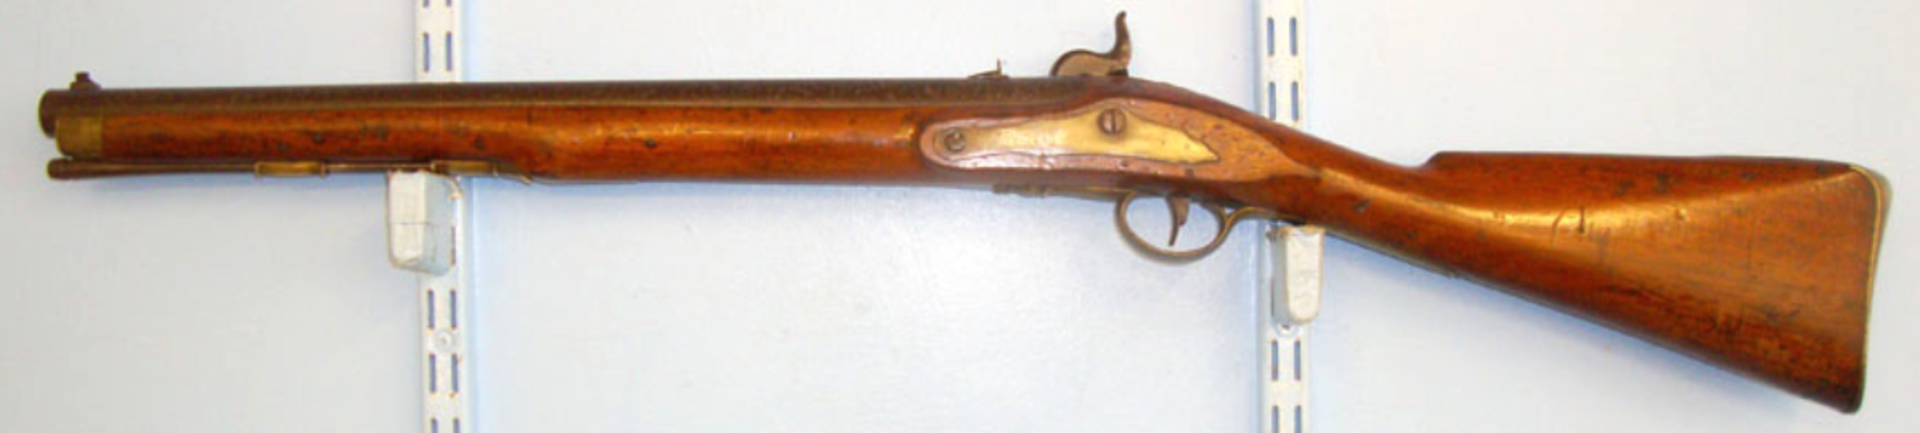 C1850 Victorian British Officer's Private Purchase Percussion Rifled 13 Bore Fusil Musket Saddle - Image 3 of 3